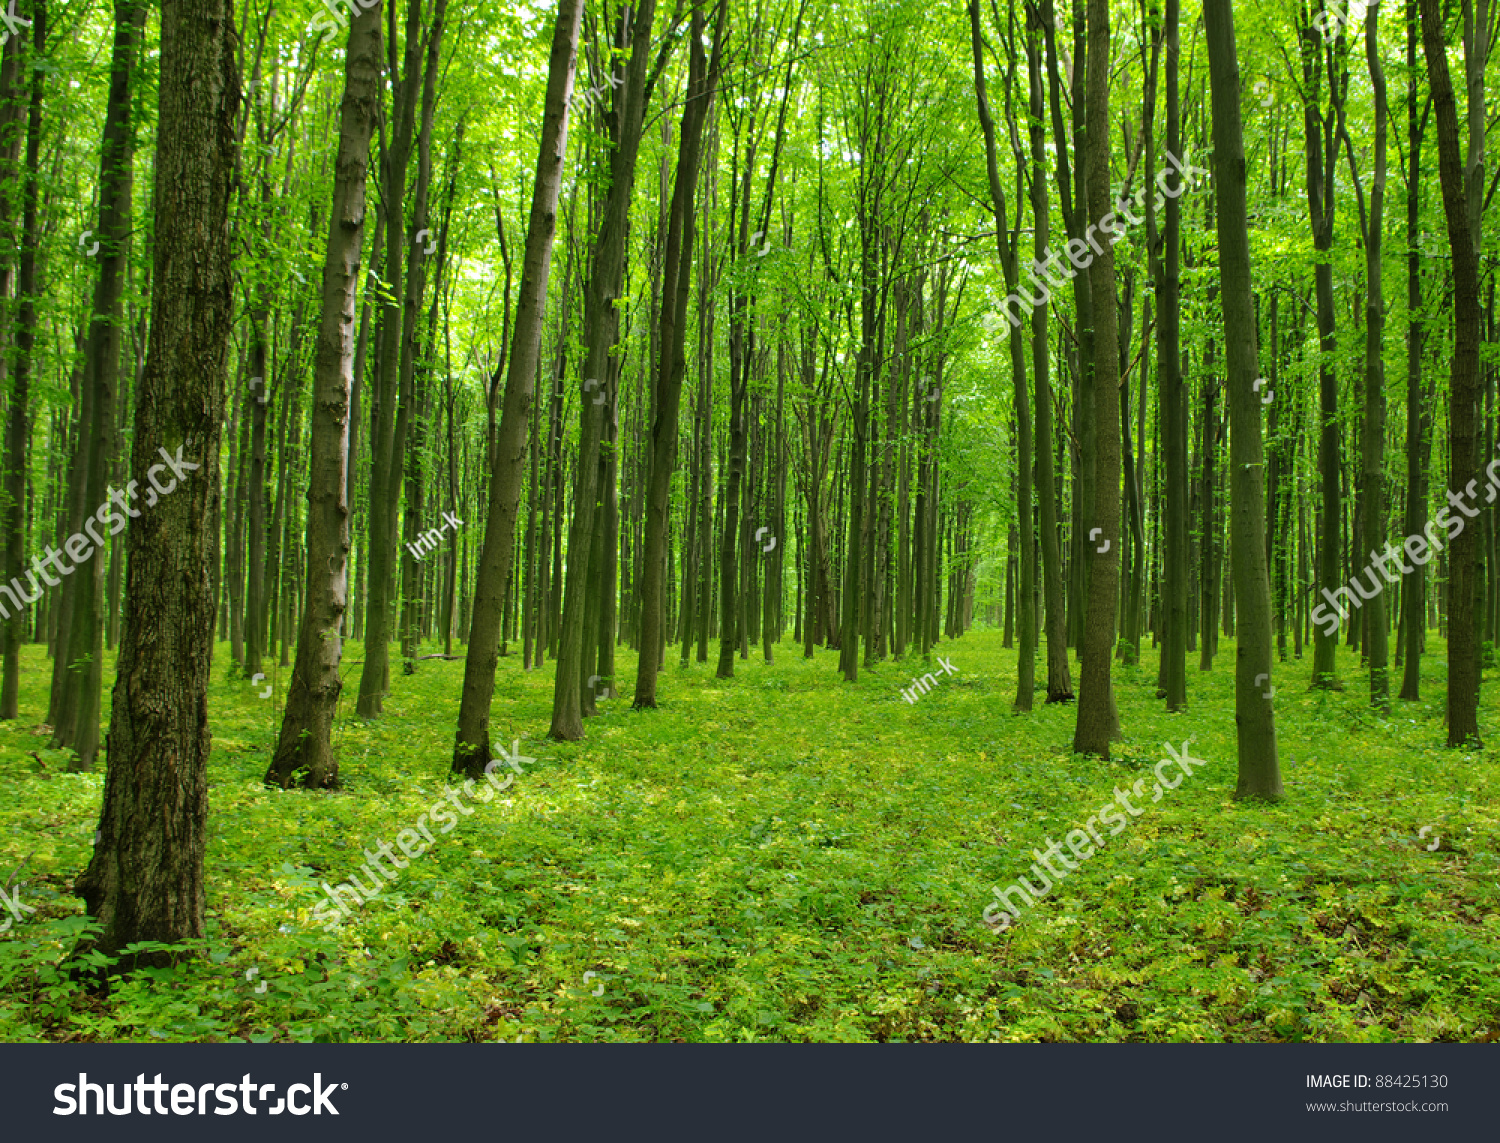 Trees Forest Stock Photo 88425130 - Shutterstock